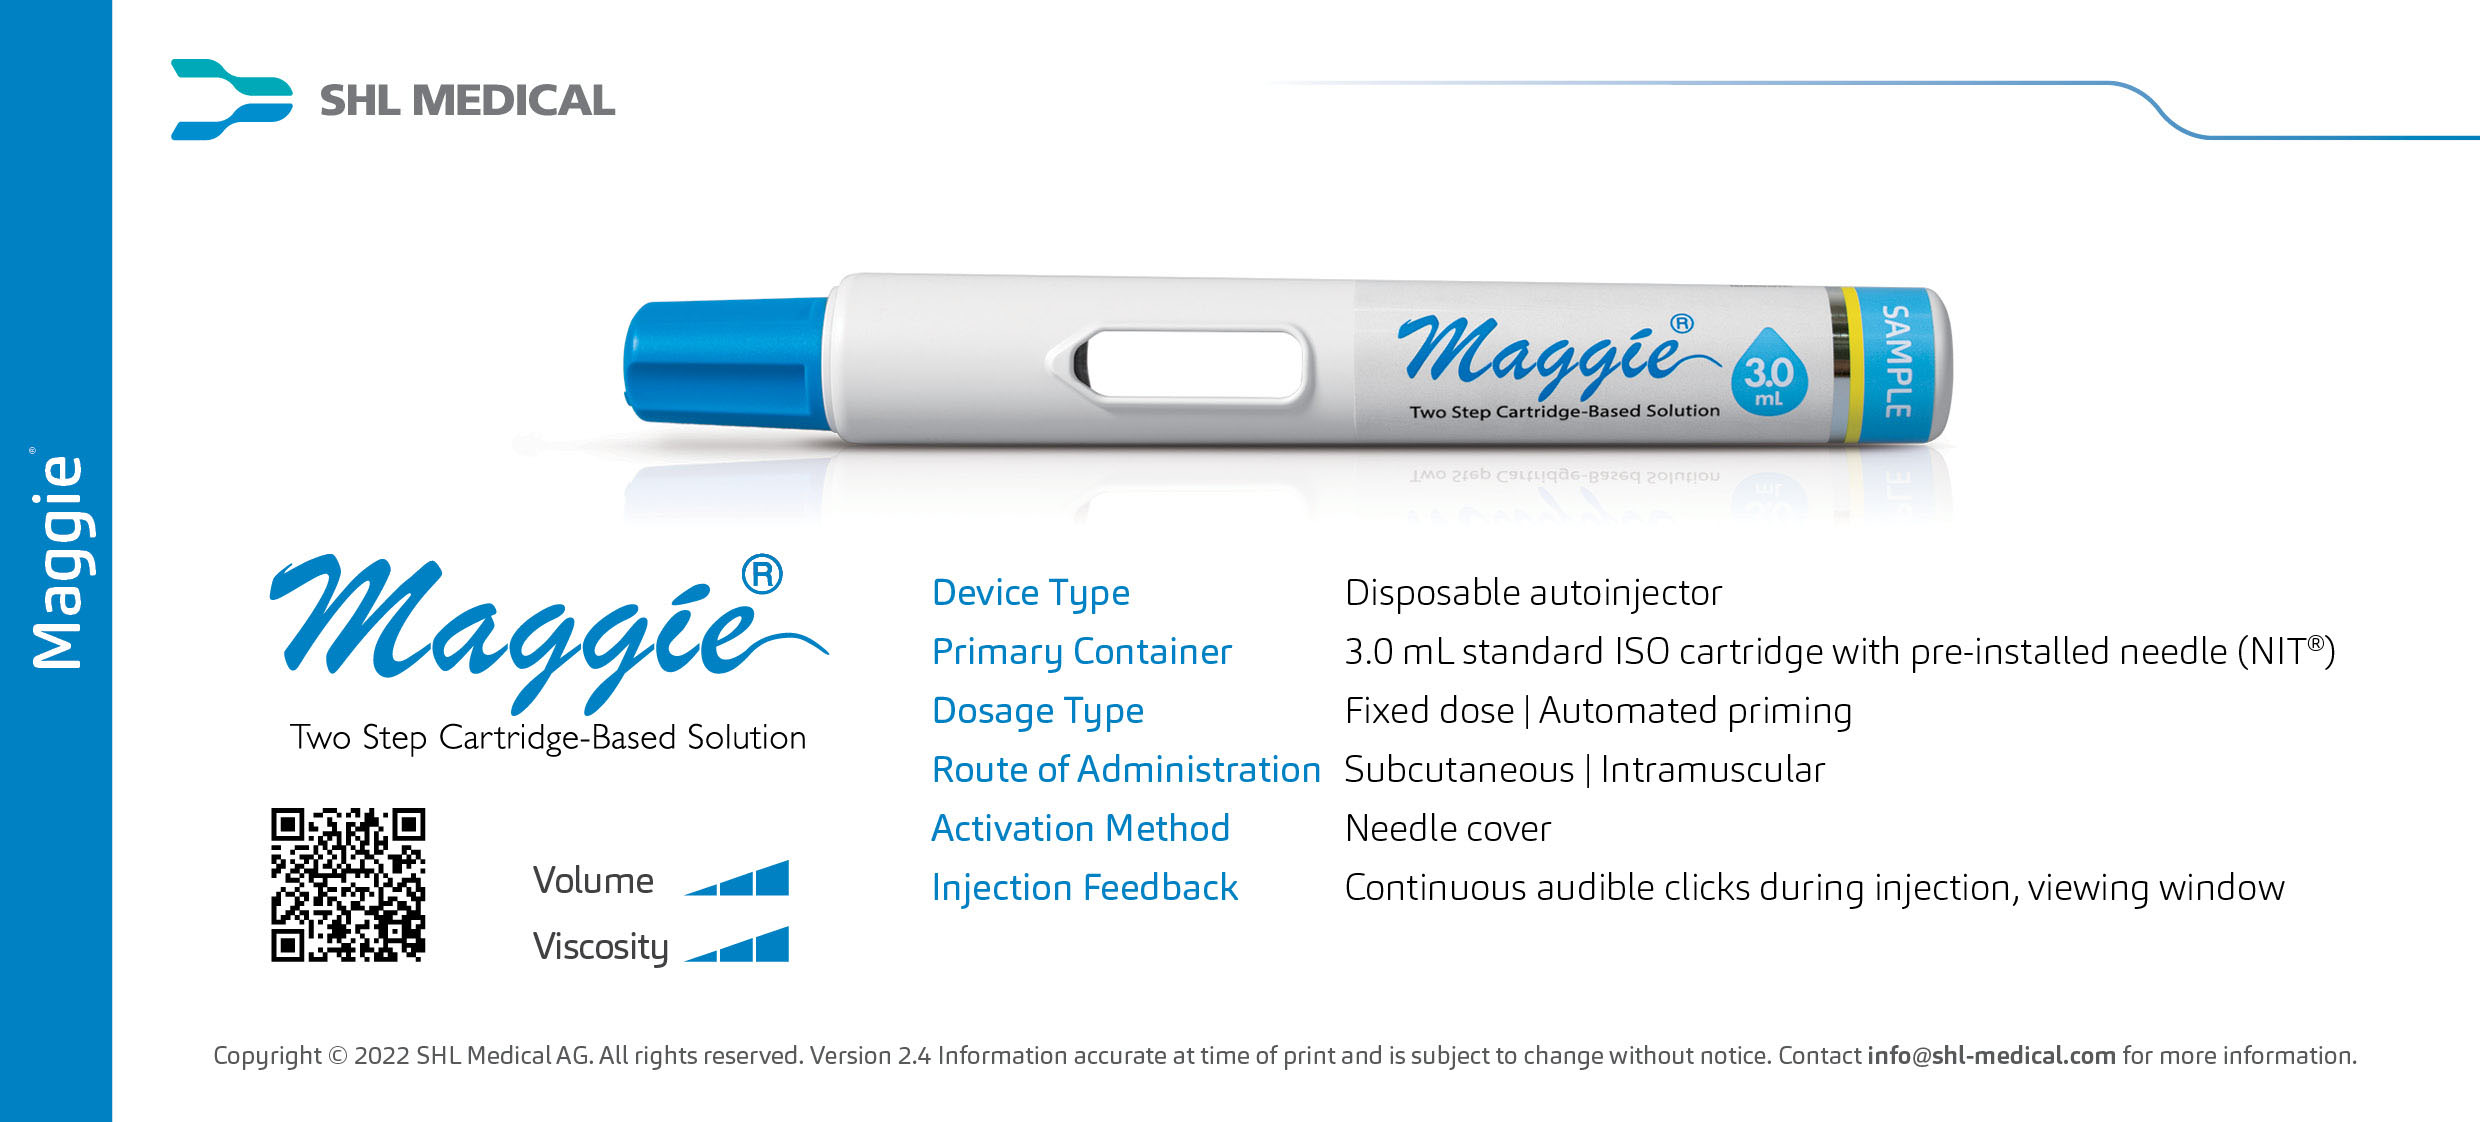 Product card of Maggie® cartridge-based autoinjector that accommodates up to 3 mL fill volumes built with SHL Medical’s Needle Isolation Technology (NIT®) featuring its device specifications and handling instructions